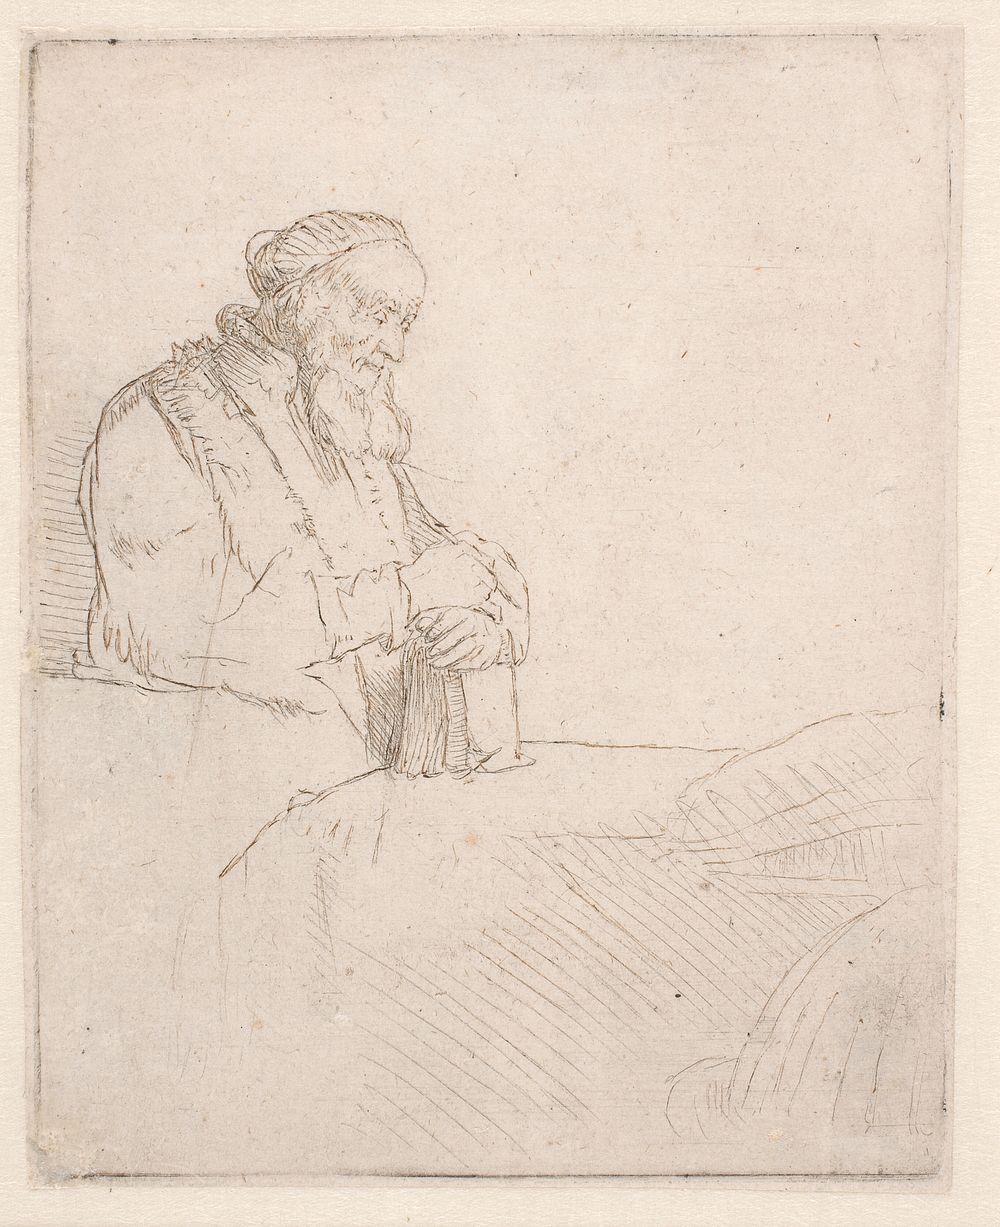 Old man, in thought with his hands on a book by Rembrandt van Rijn